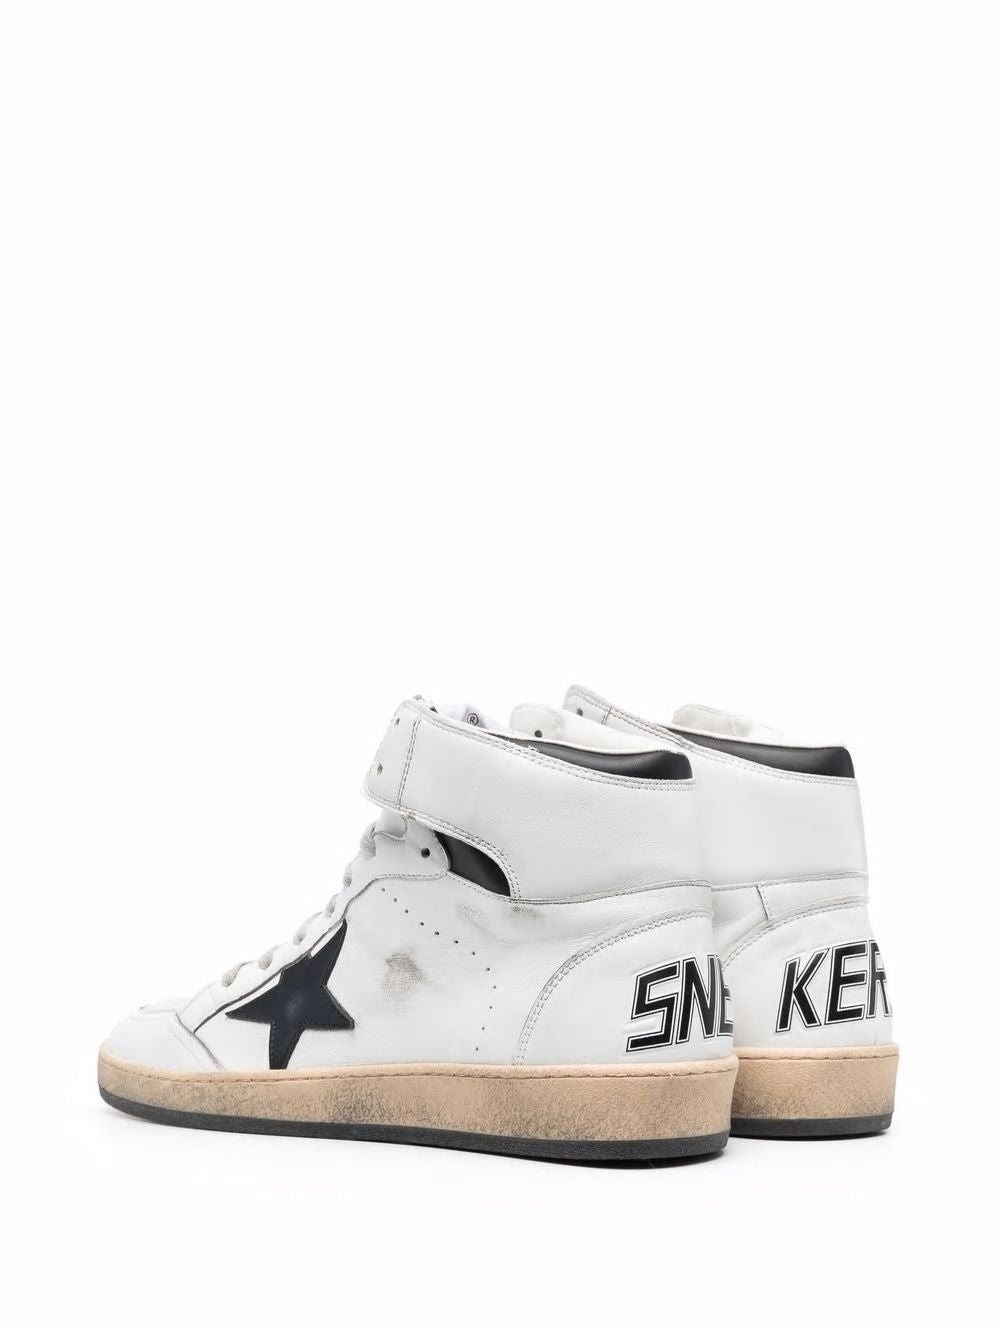 GOLDEN GOOSE White High Top Sneakers for Men - SS24 Collection